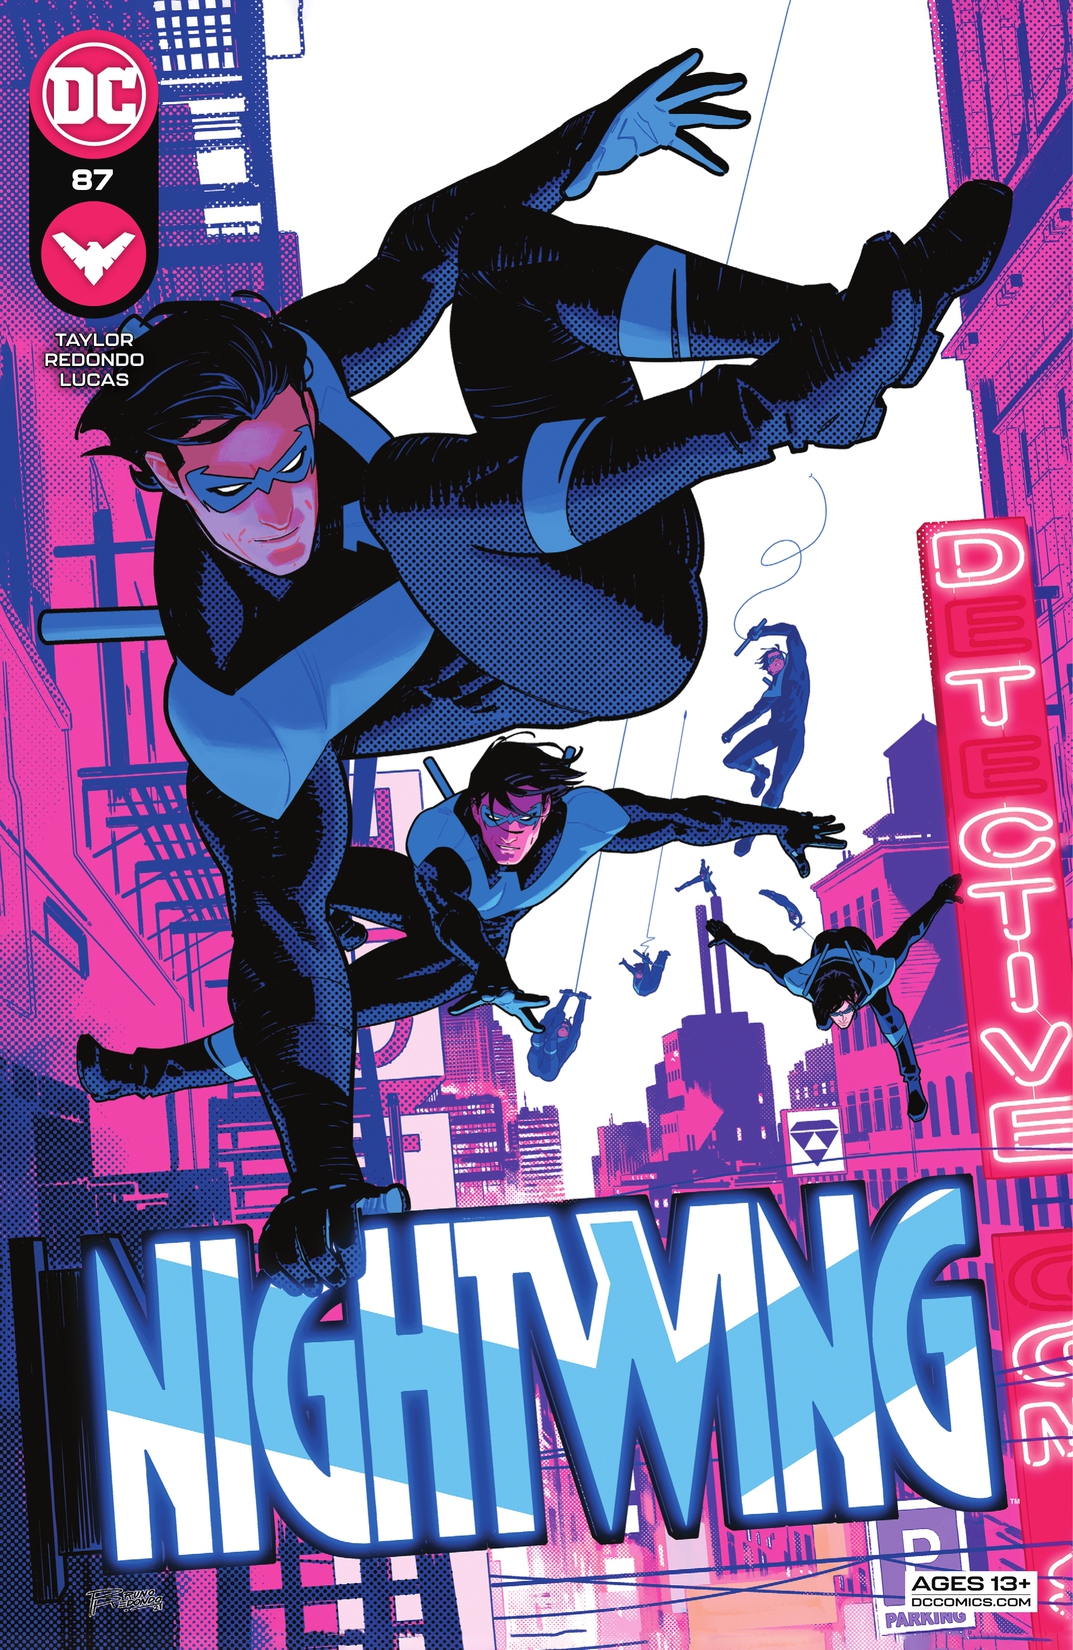 Nightwing (2016-) #87 preview images